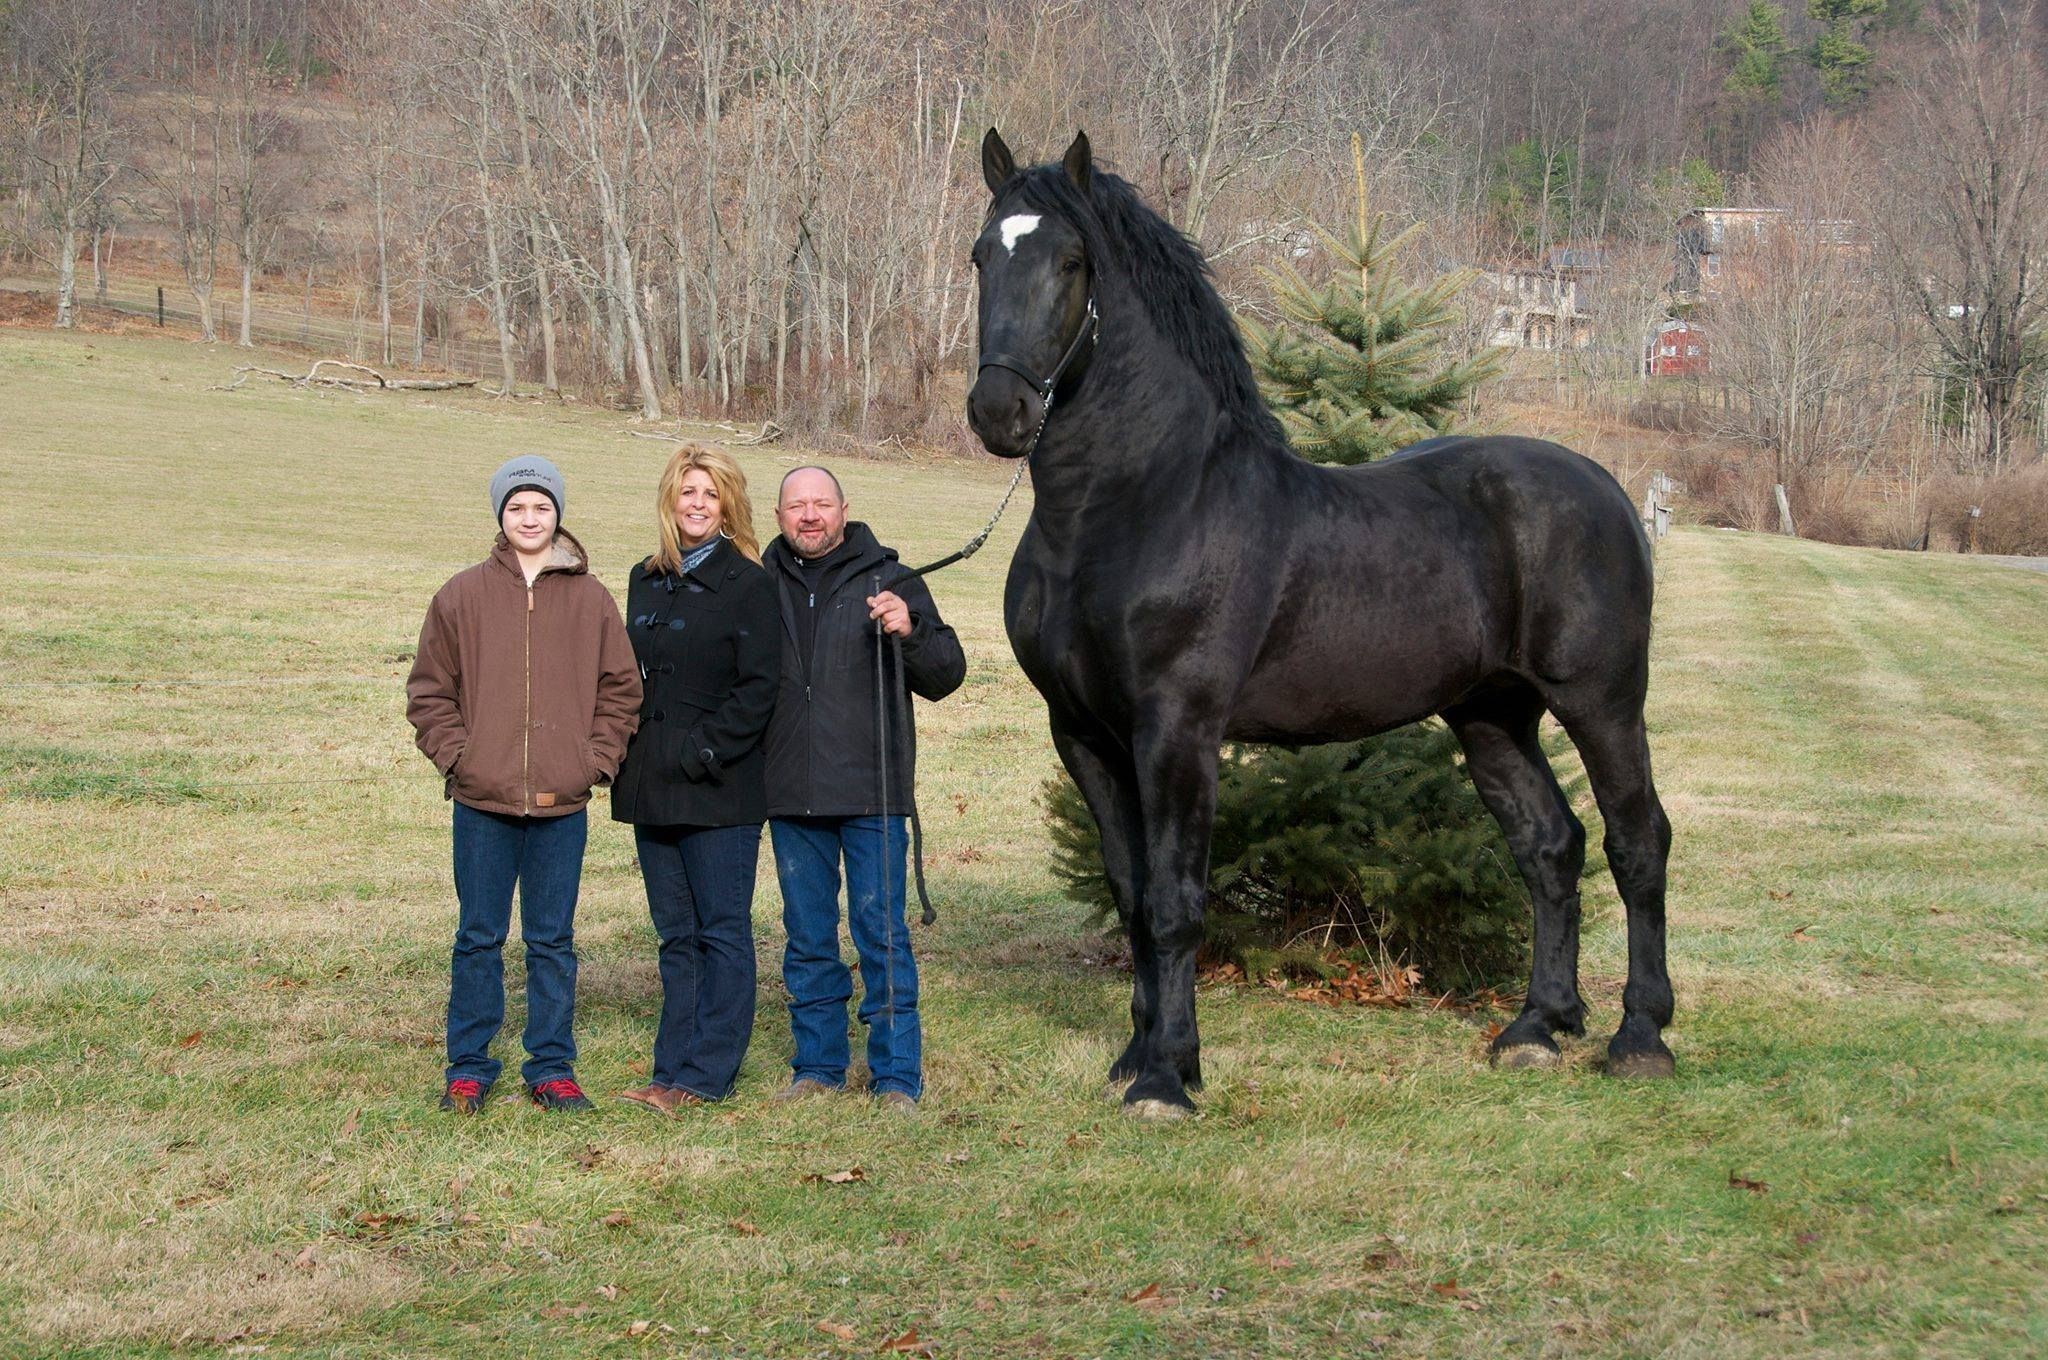 8 Fascinating Facts About The Giant Percheron Horse Breed